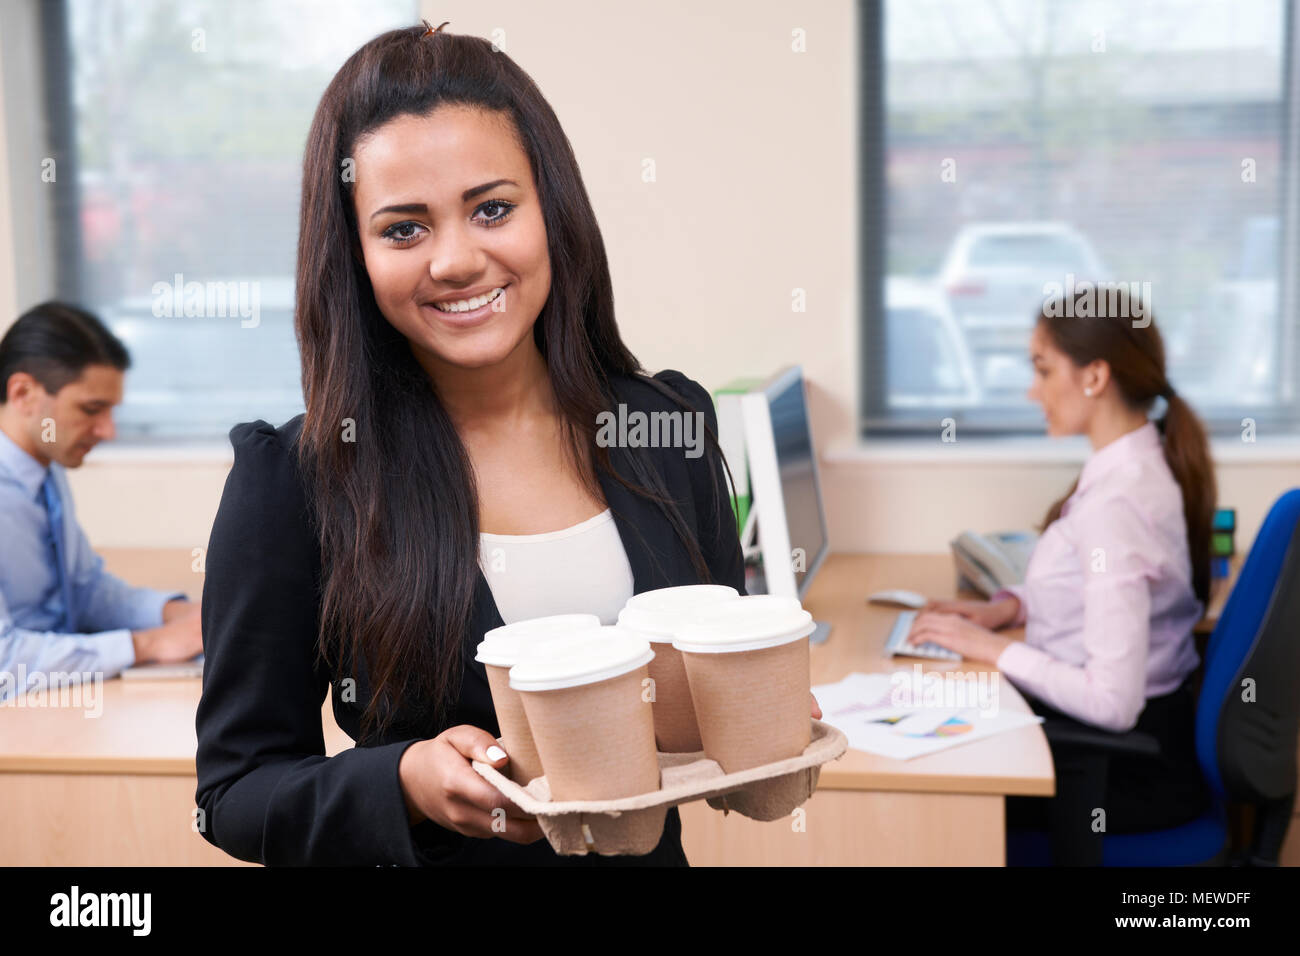 Female Intern Fetching Coffee In Office Stock Photo